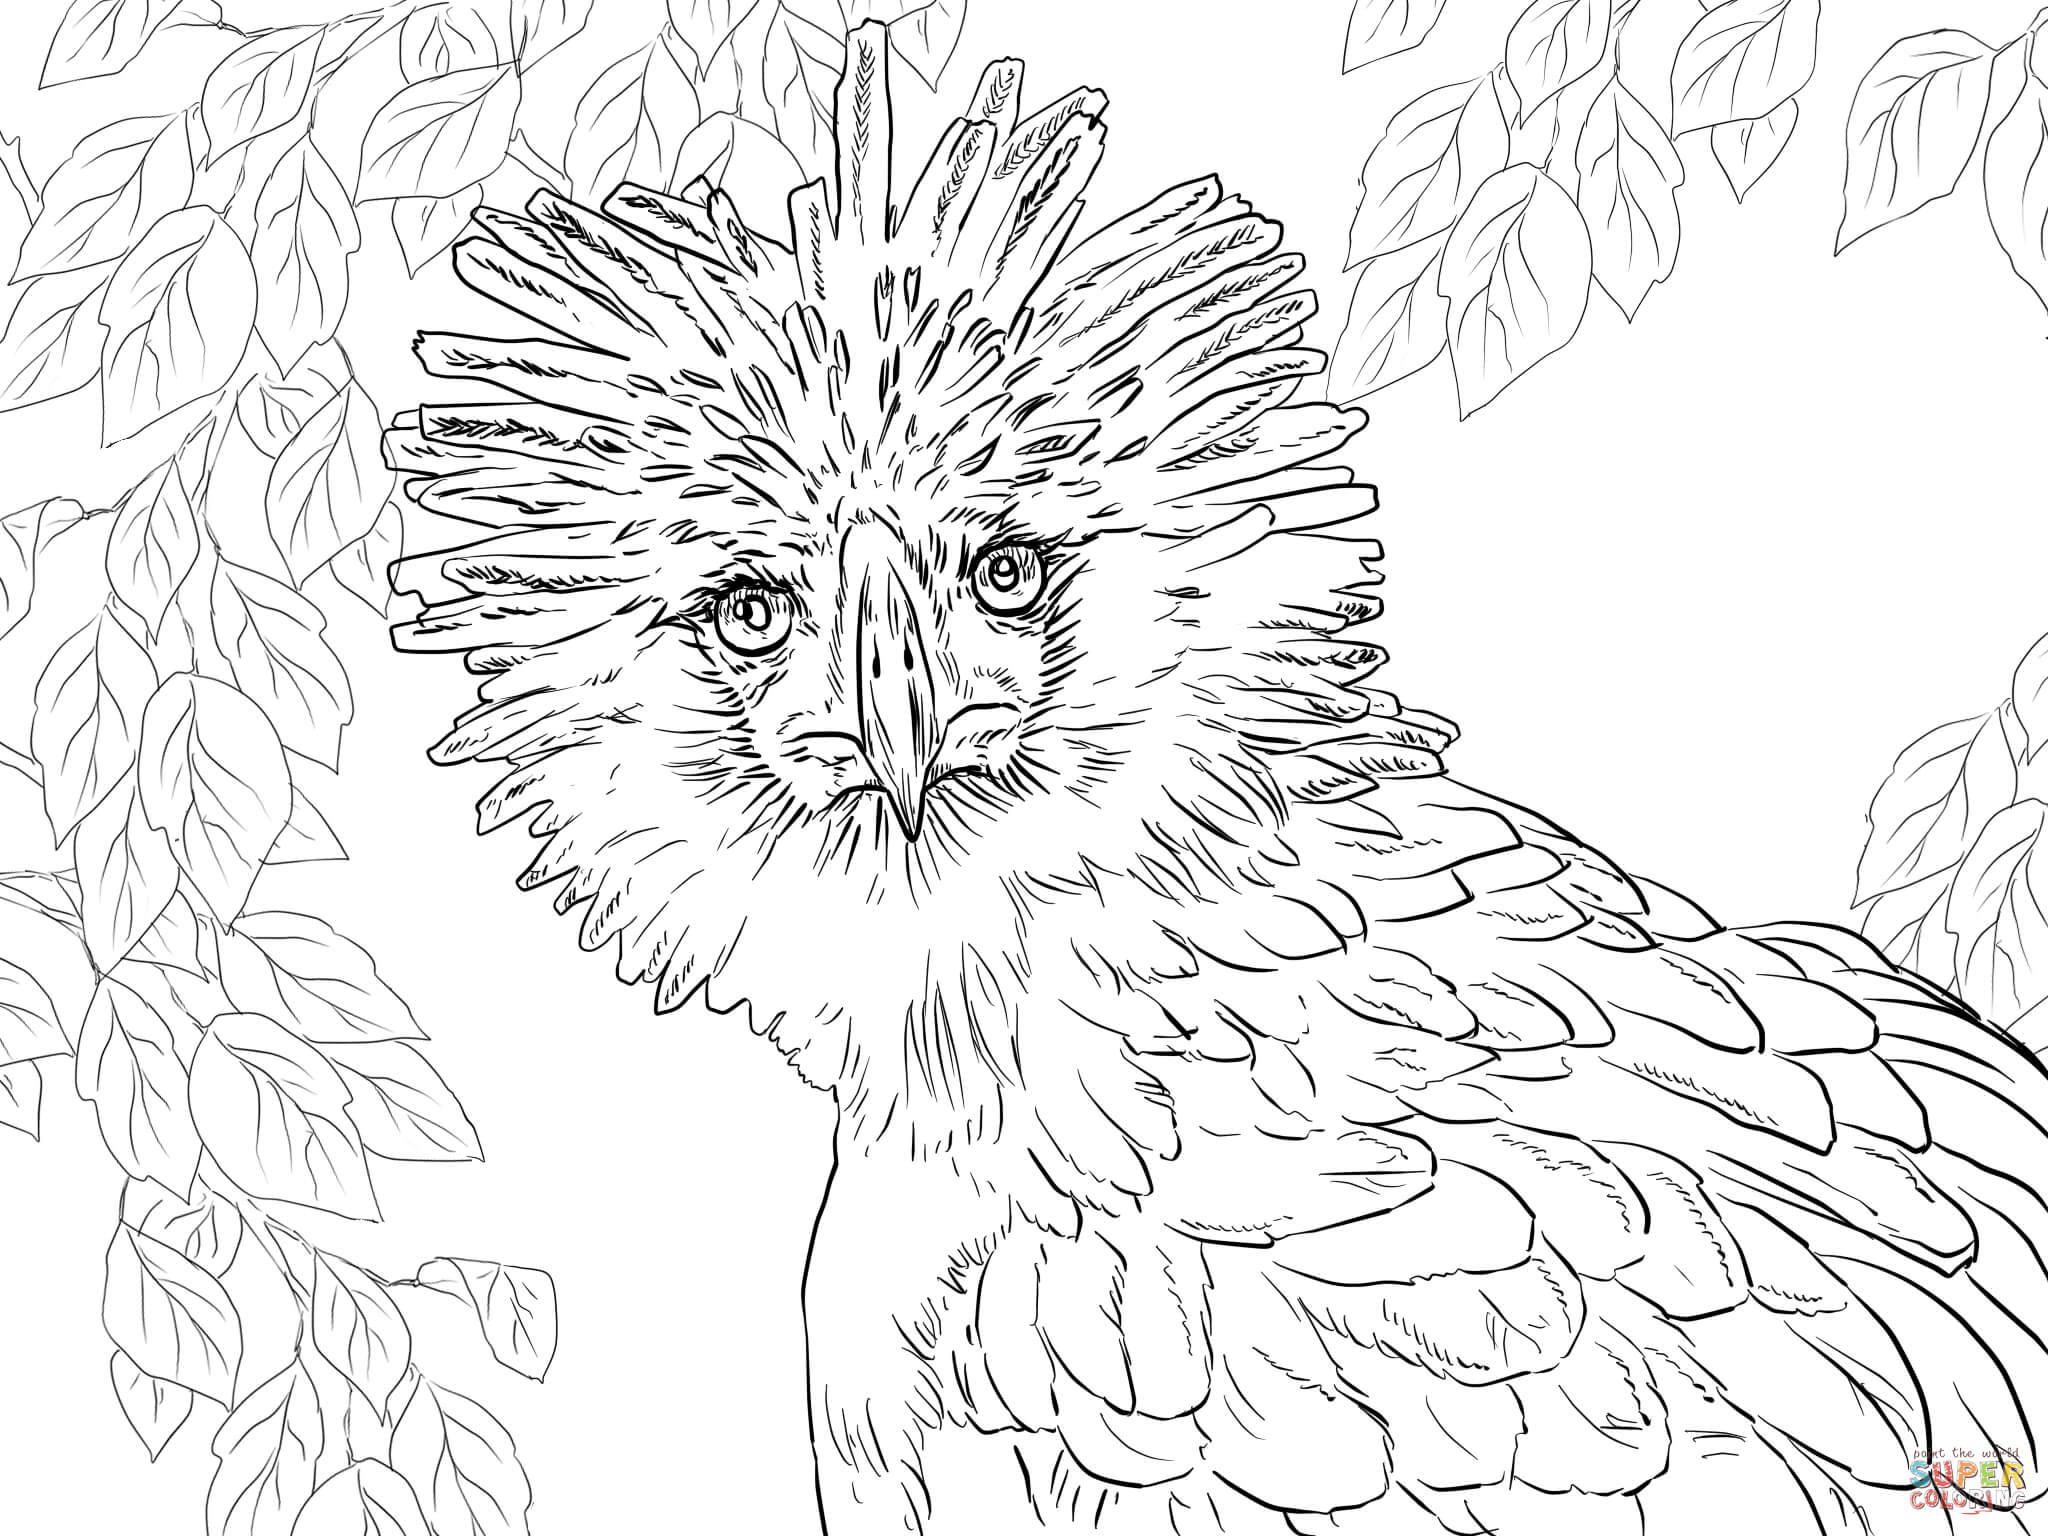 Phillipine Eagle coloring #9, Download drawings